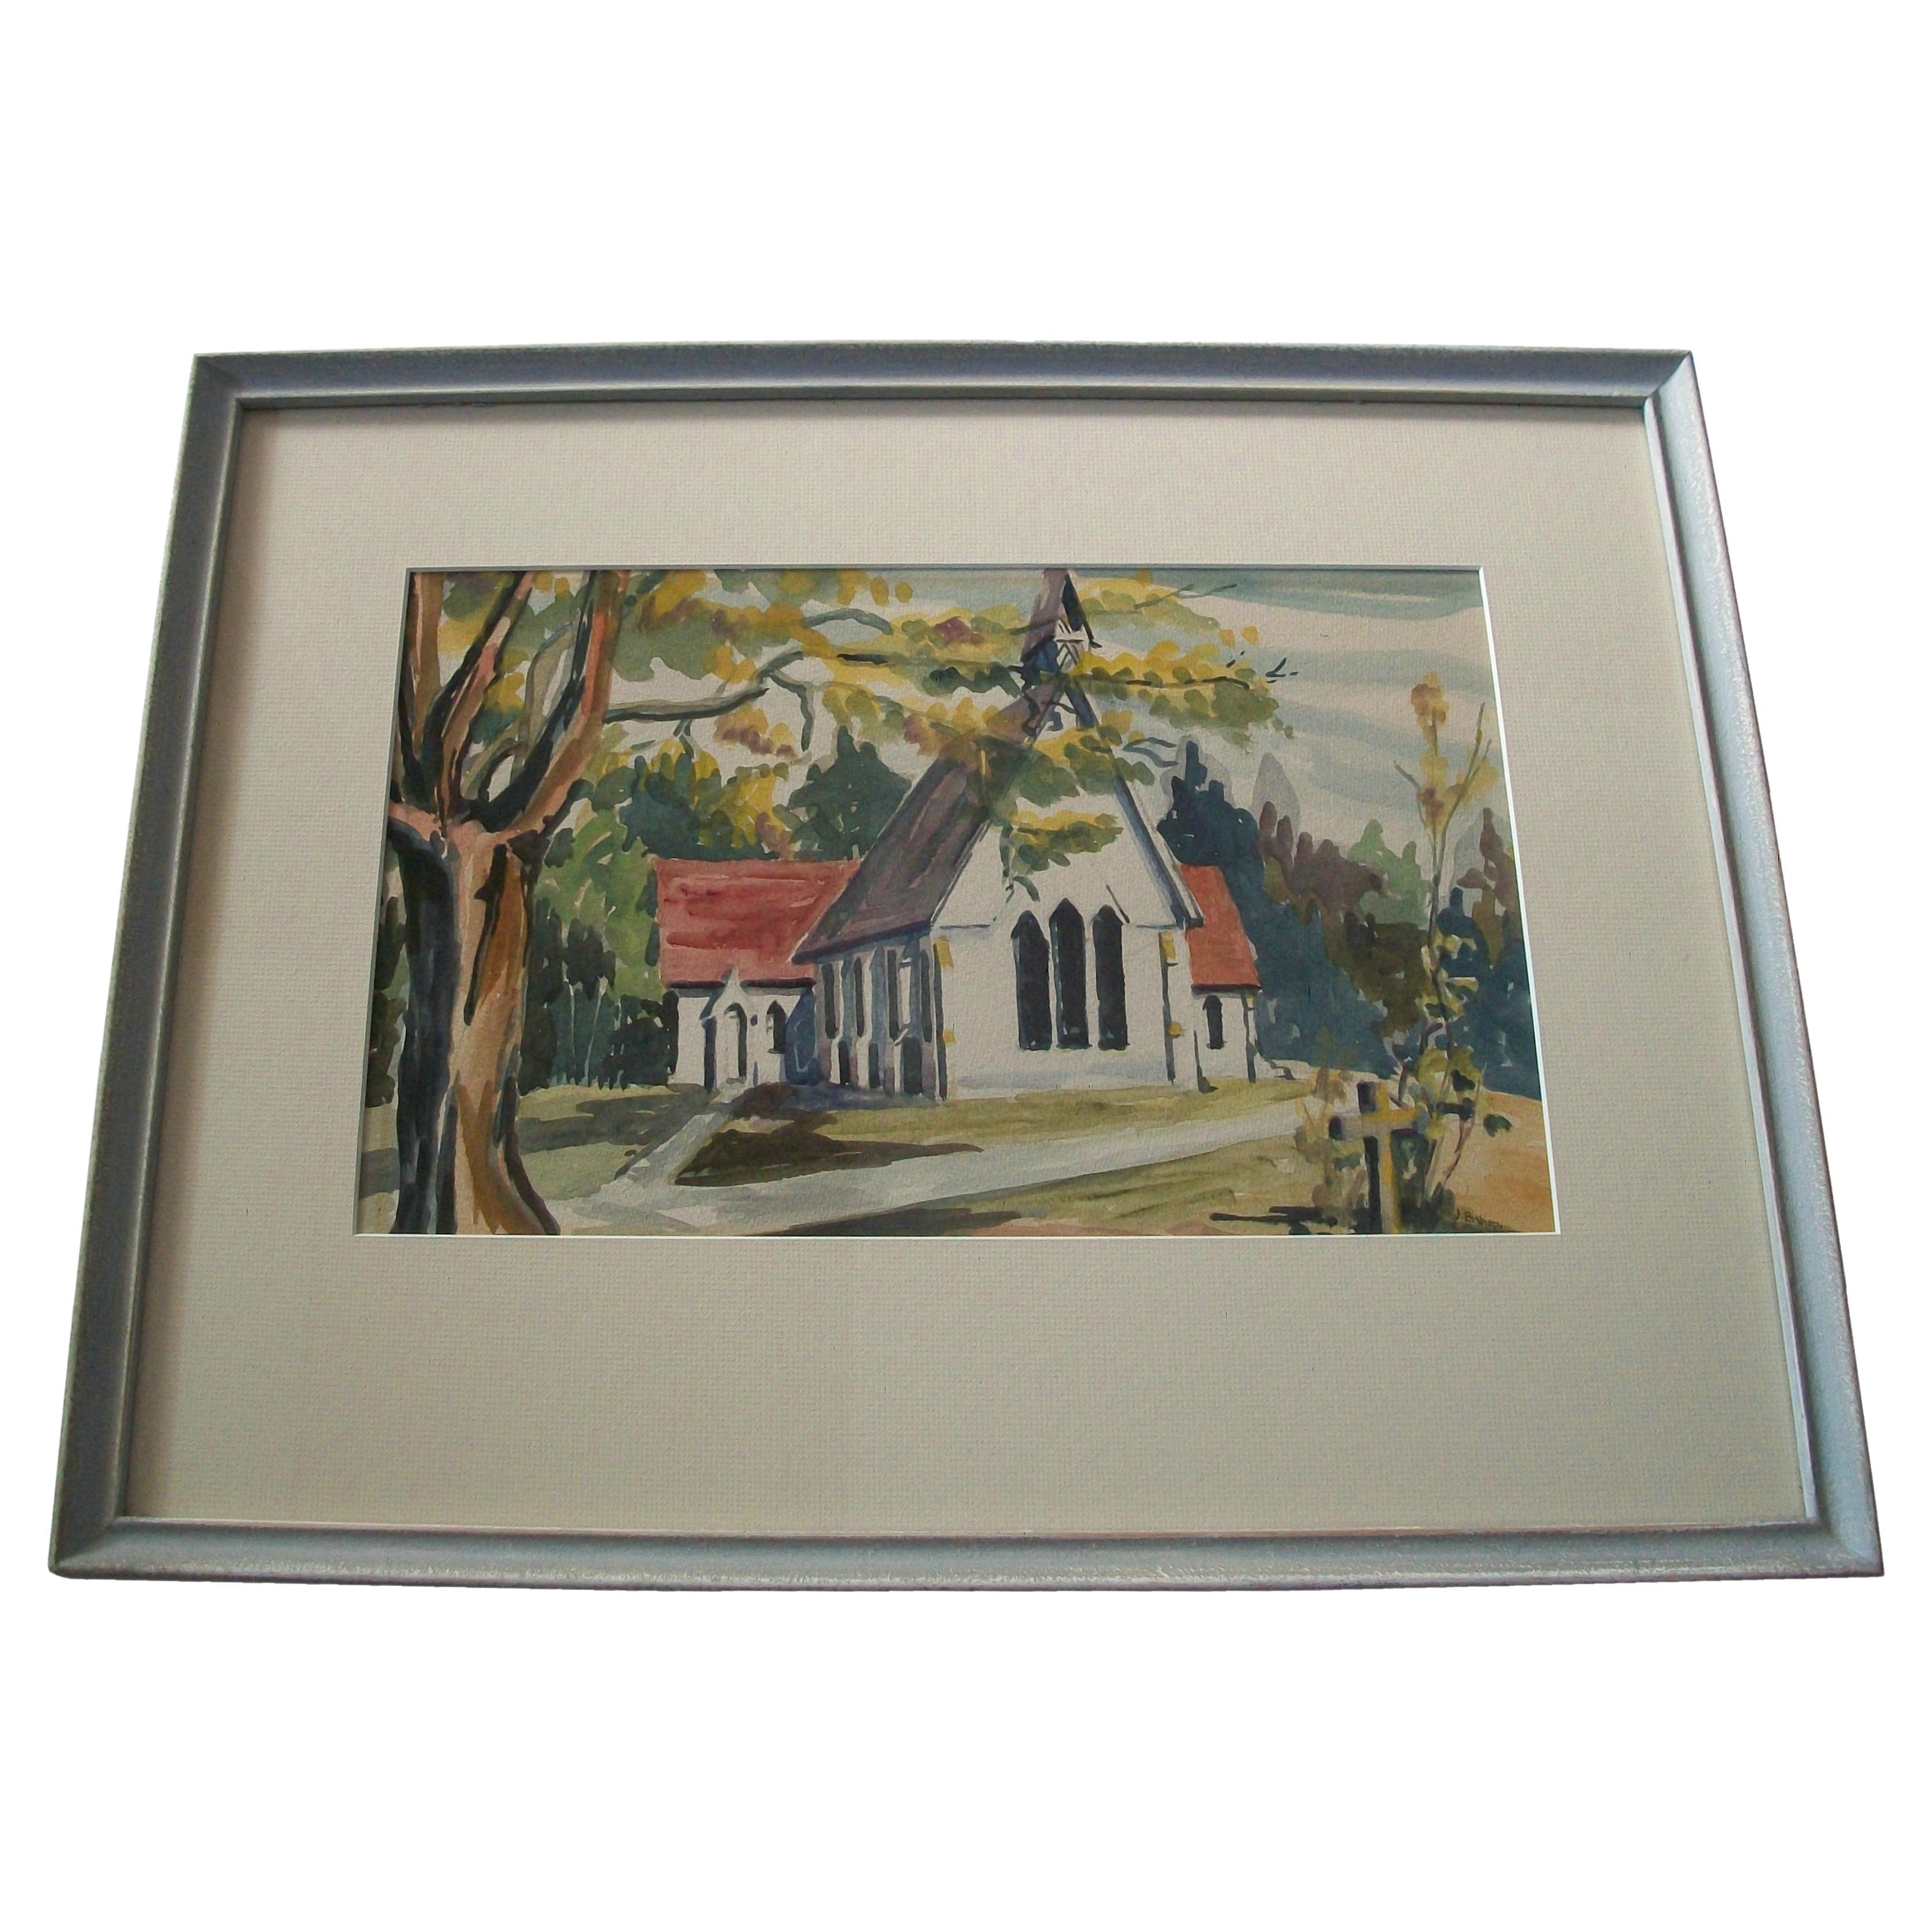 J. BISHOP (Unknown/Unidentified Artist) - 'Untitled' - Vintage watercolor painting on paper featuring a church and landscape - contained in a vintage grey painted frame with single matte board and glass - London, Ontario framer label verso - signed